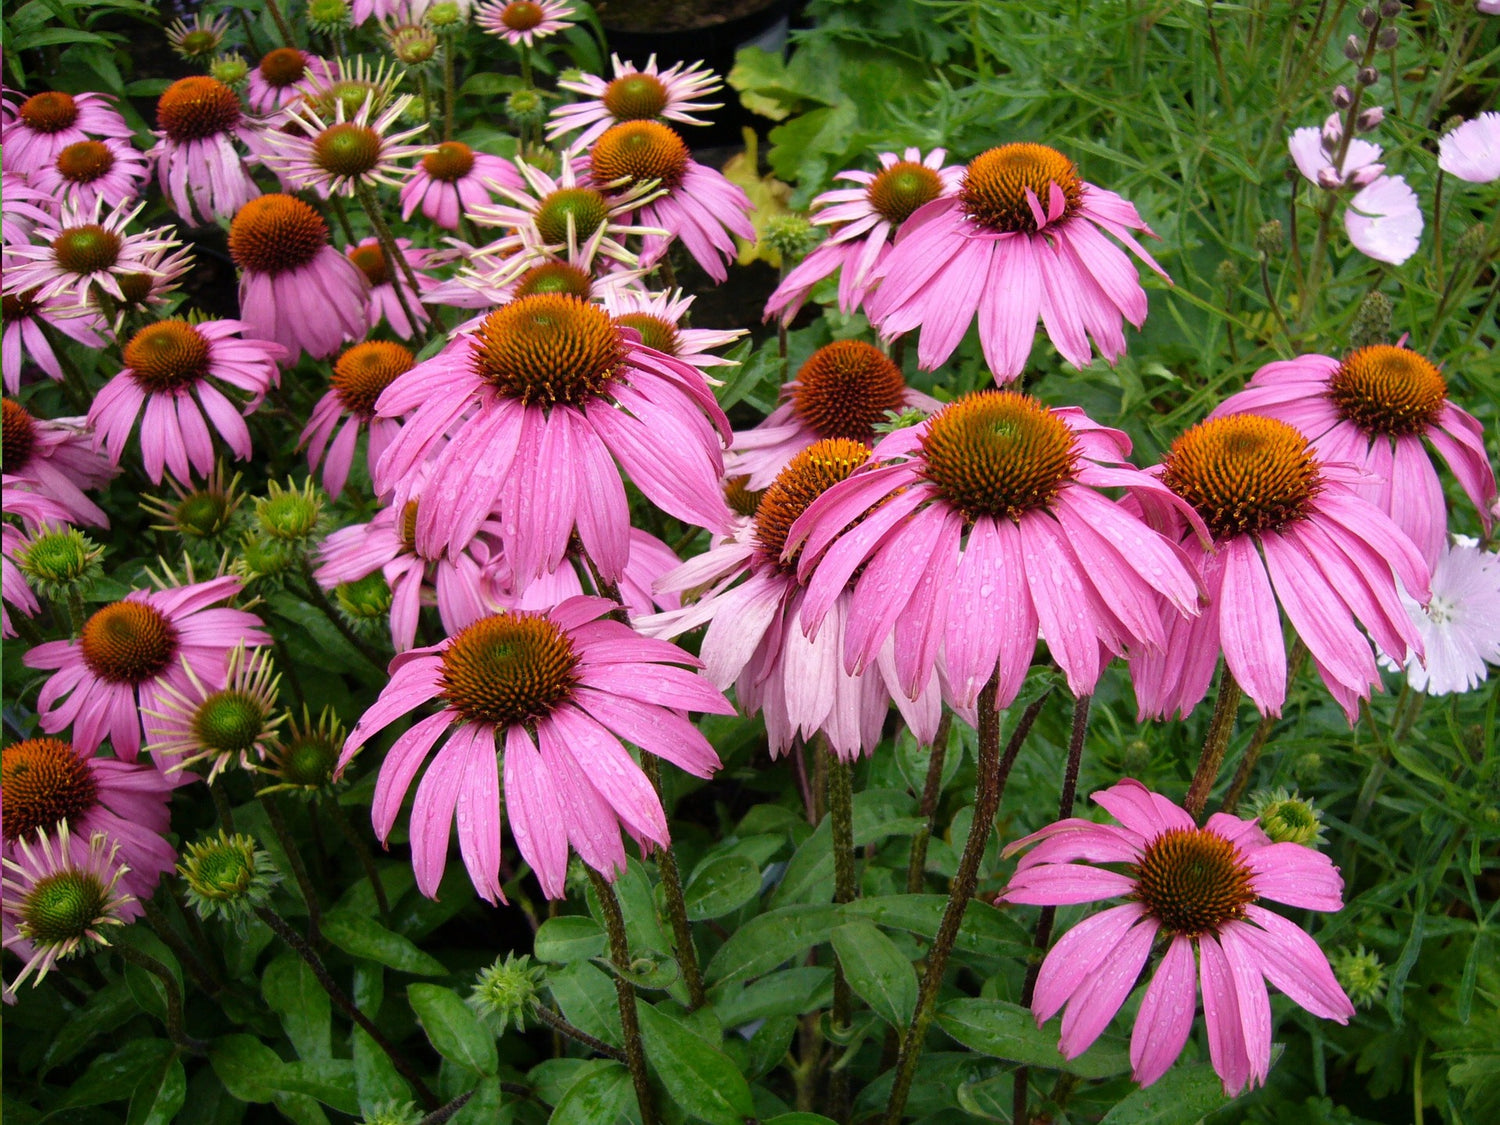 cone flower or echinacea - a key ingredient in the immune boosting elixir commonly known as Elderberry Syrup